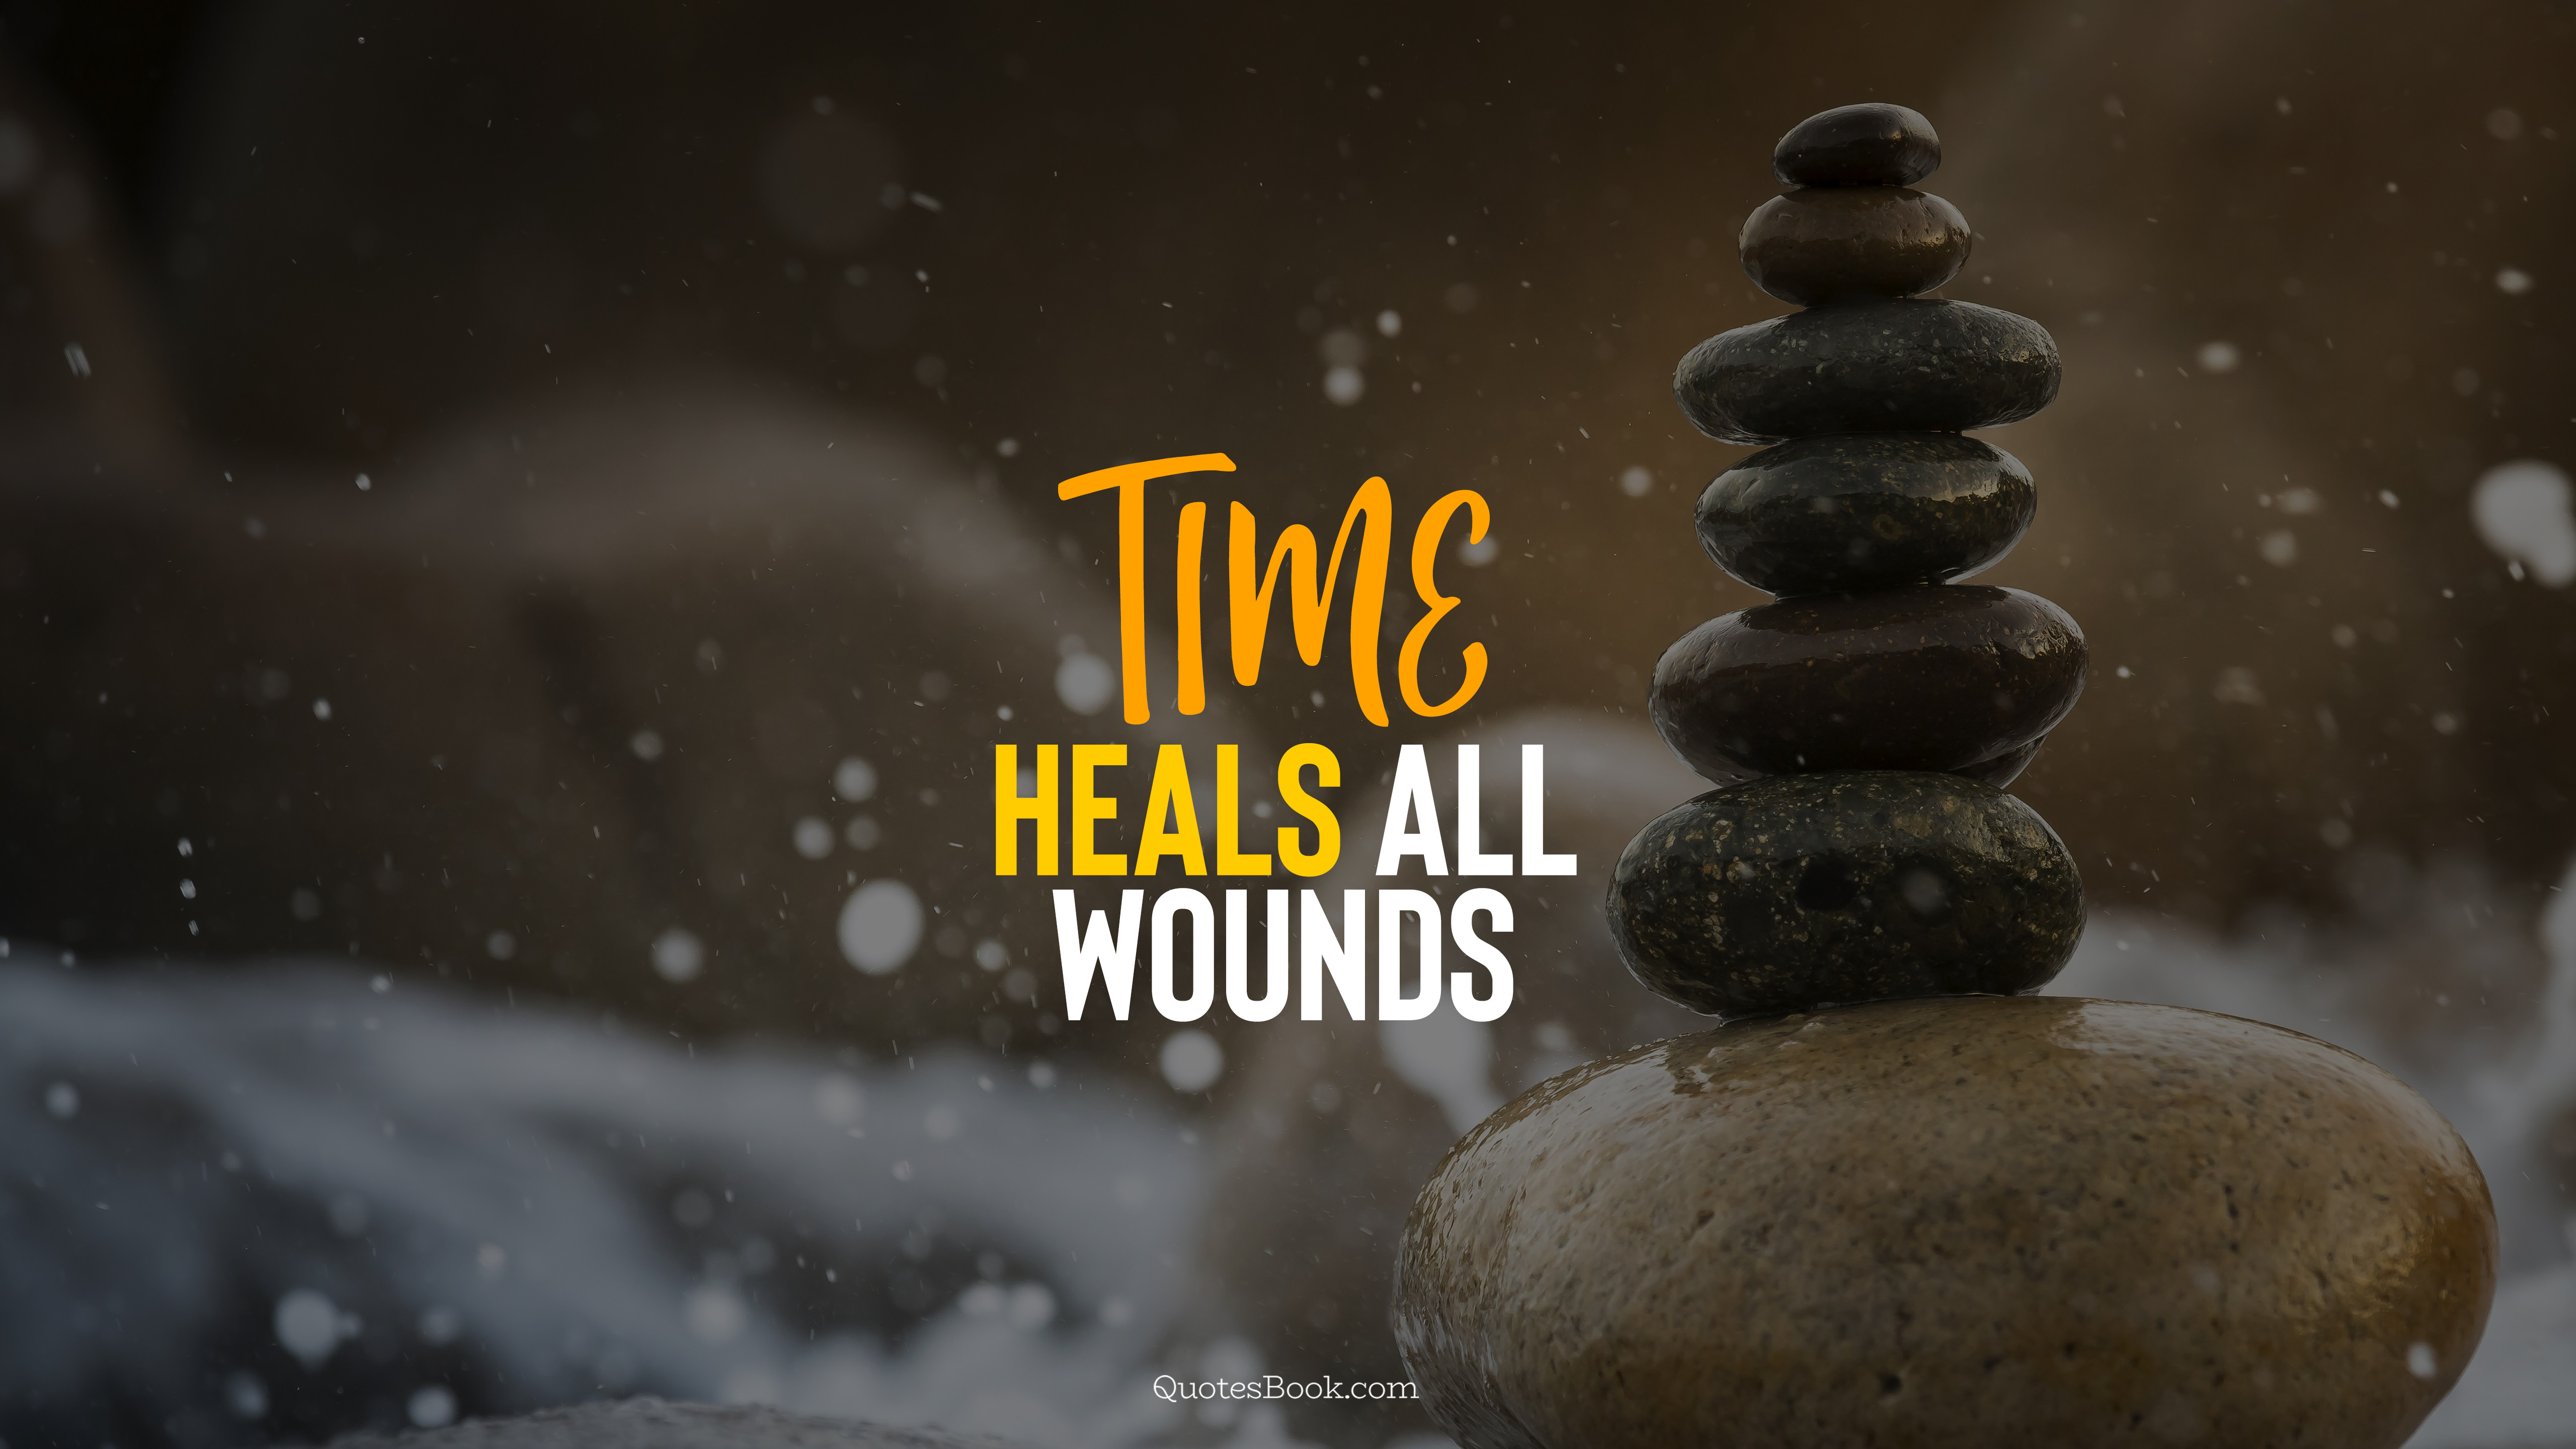 time heals all wounds 5120x2880 4642